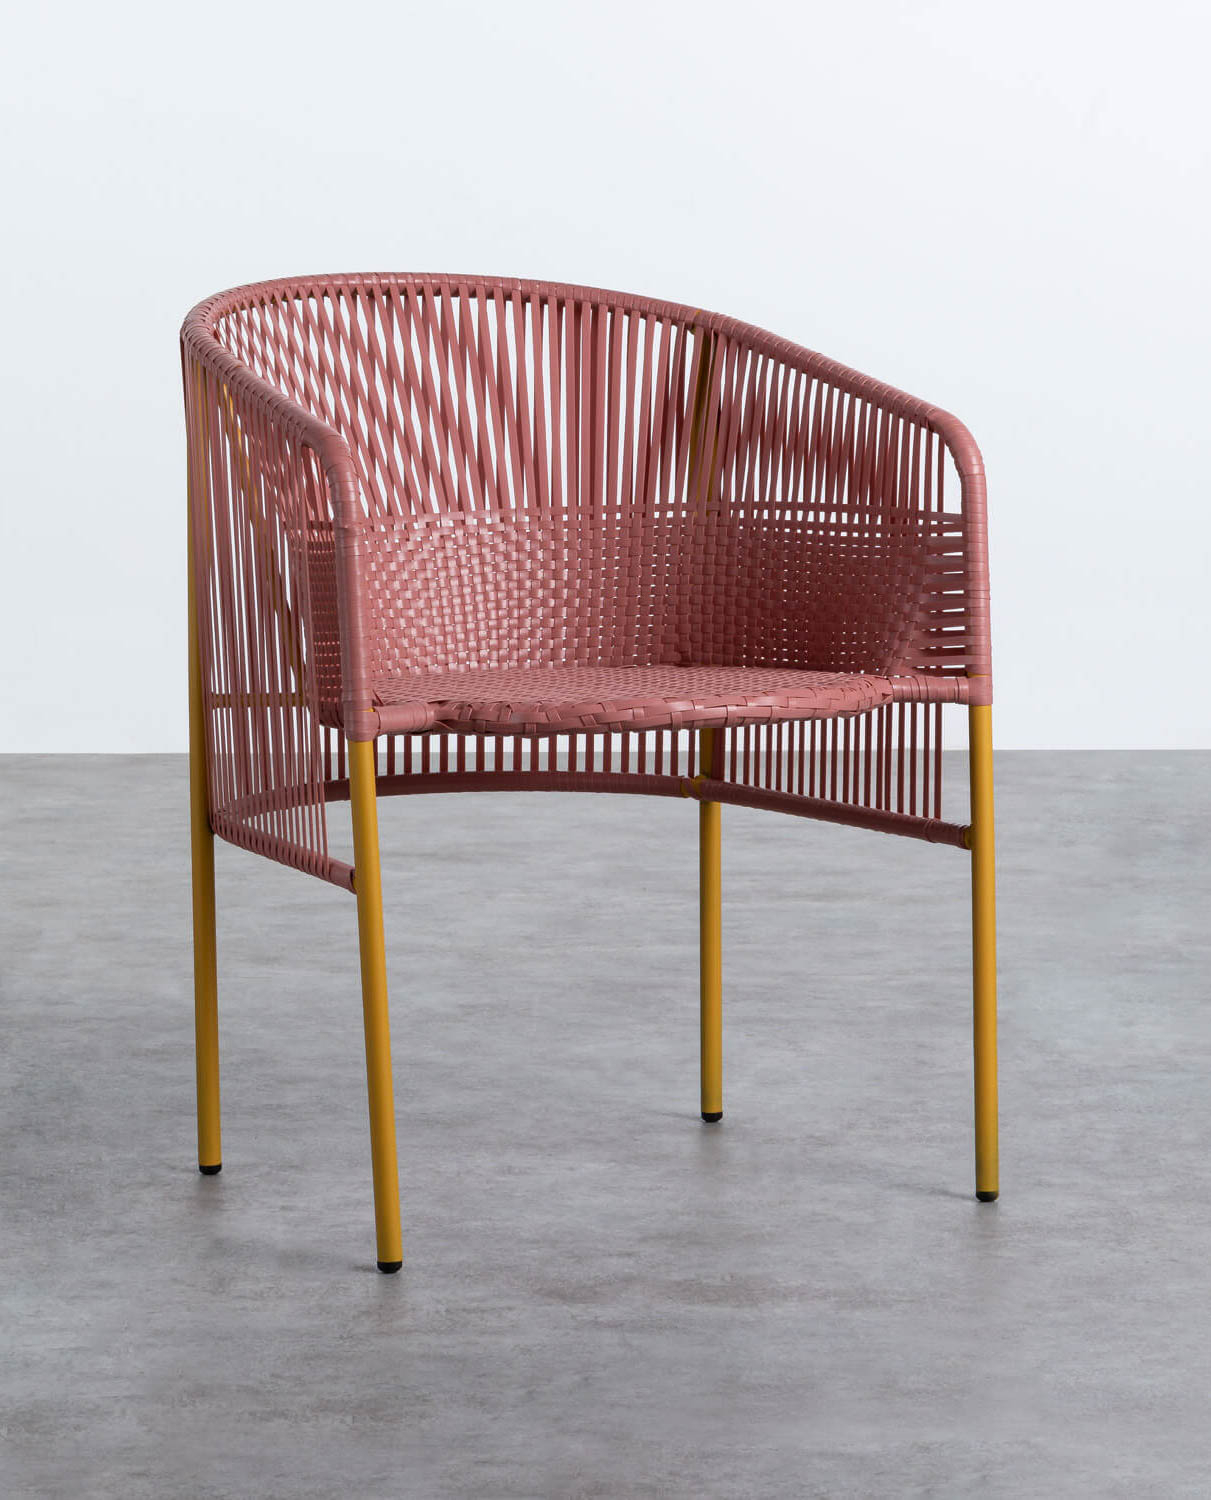 Rattan and Steel Outdoor Chair Orka Trend, gallery image 1